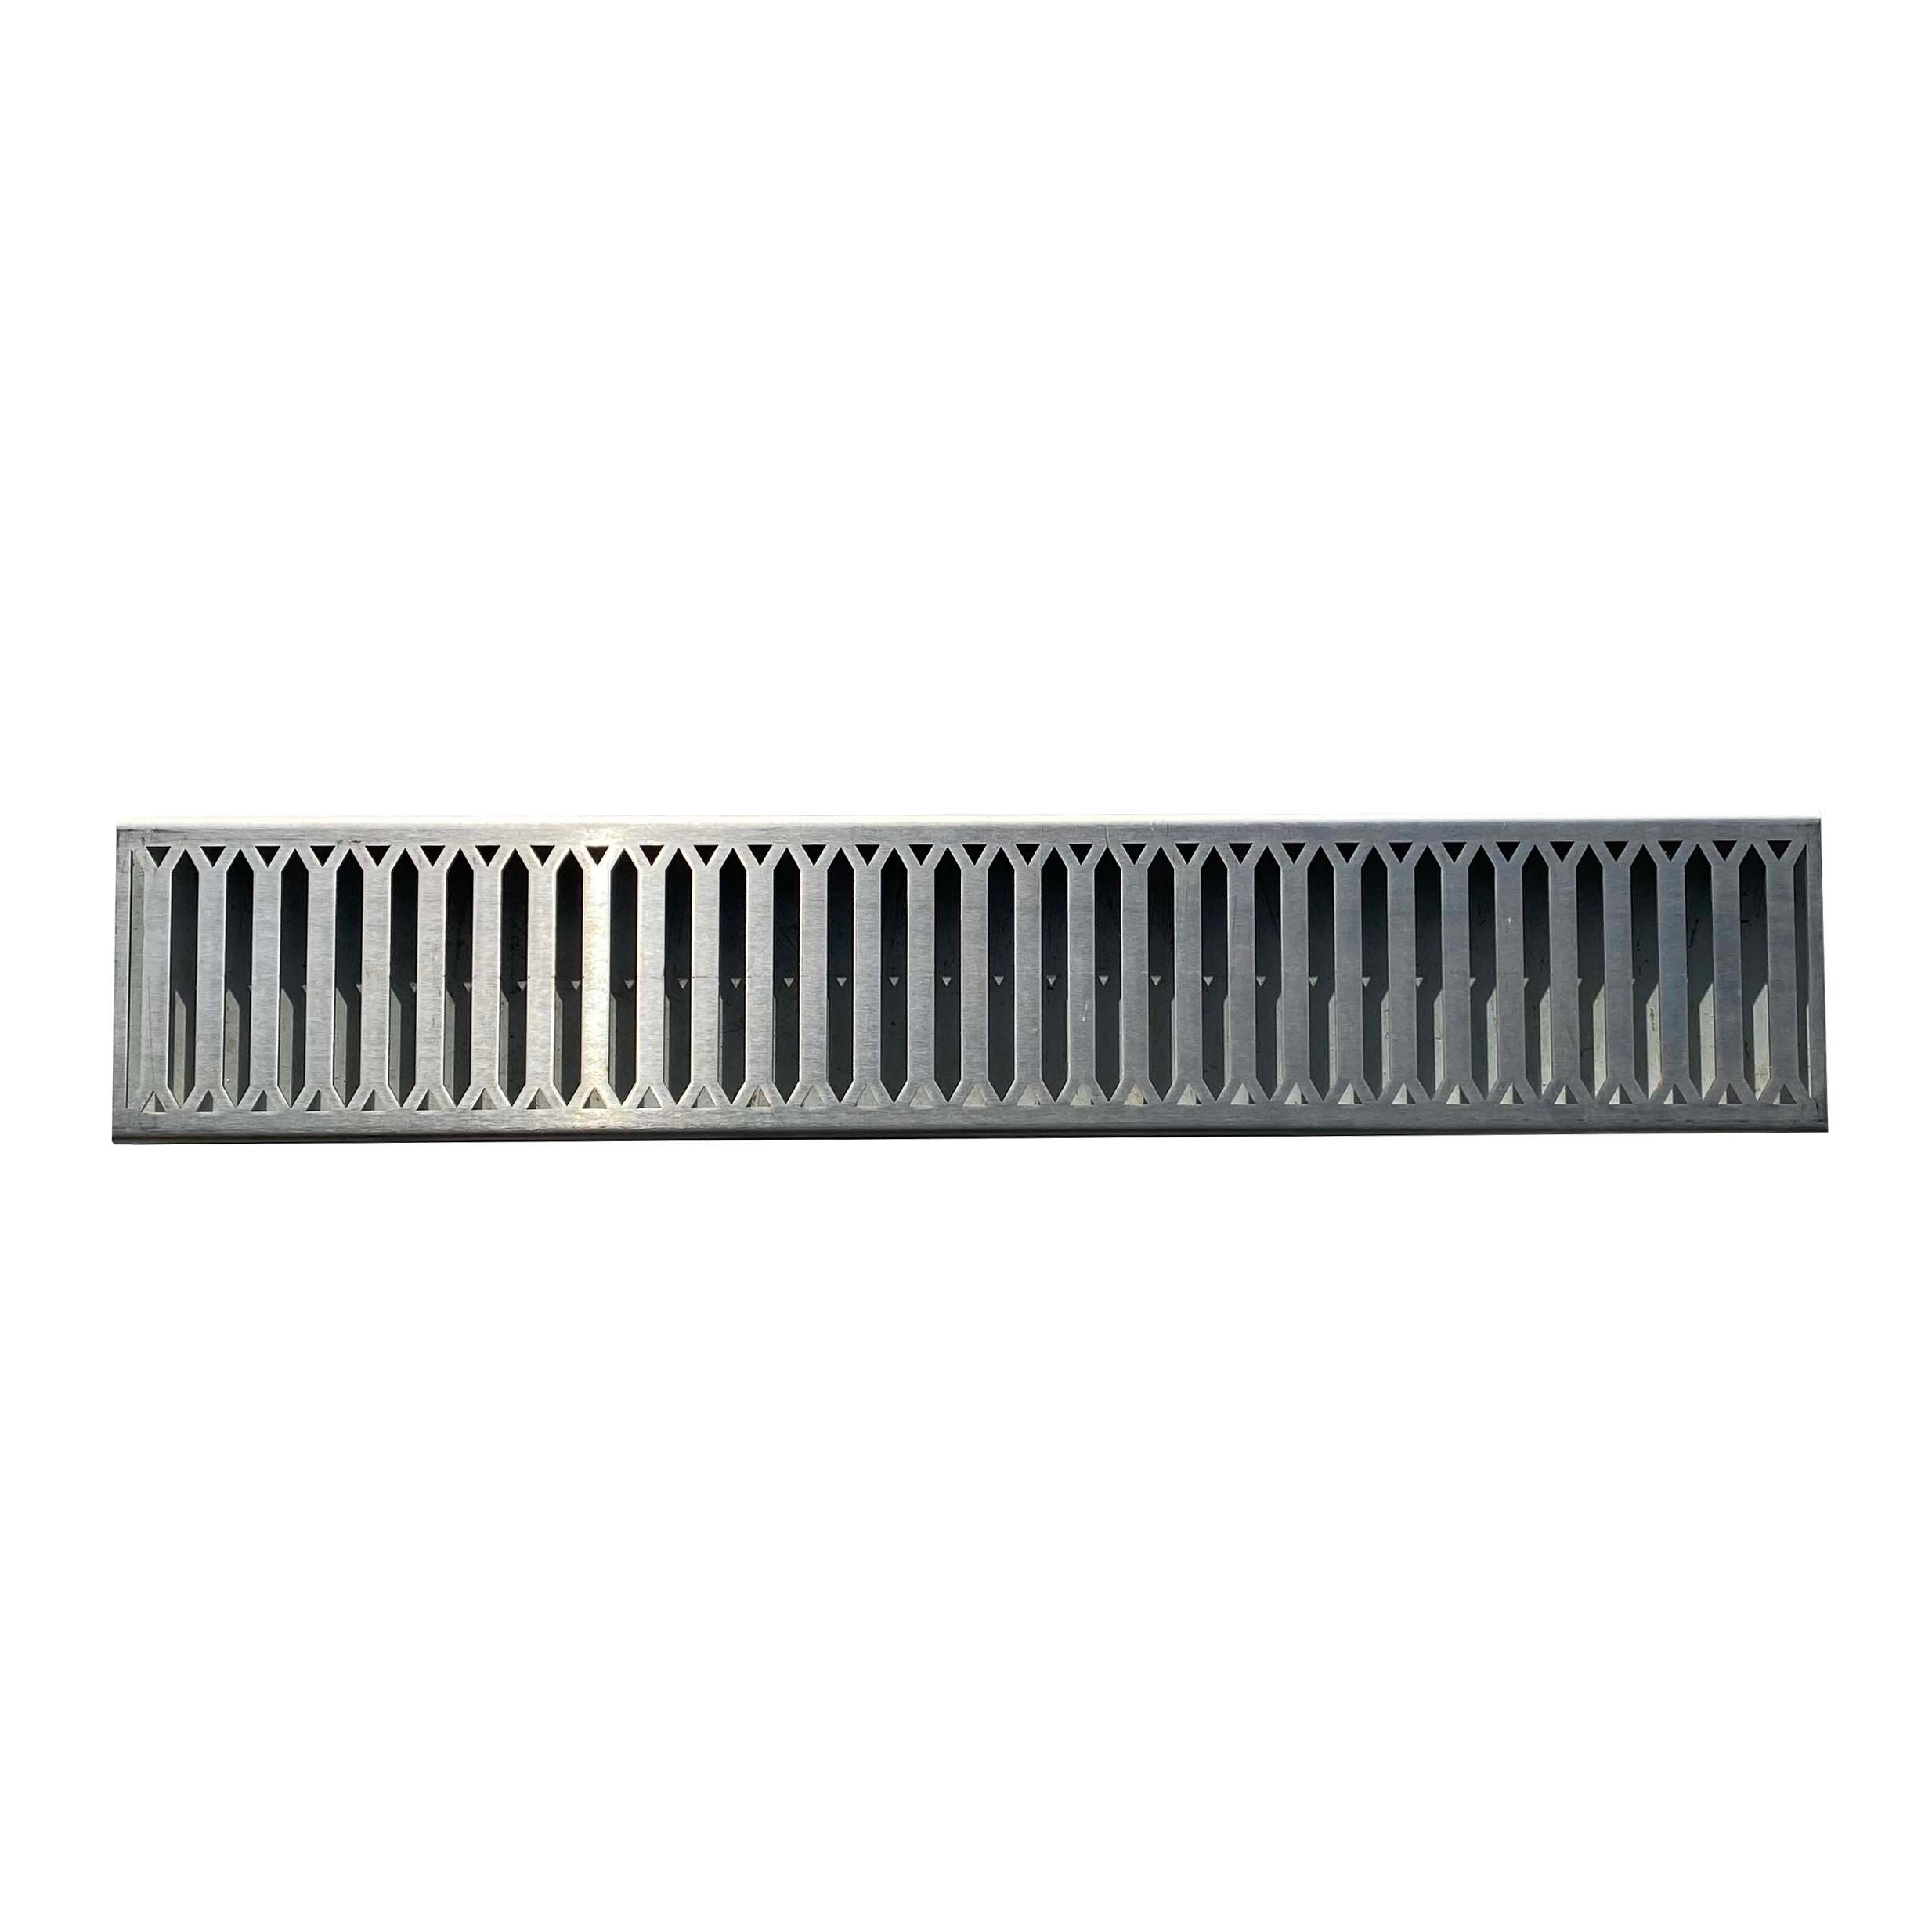 [CLEARANCE] Hexagon 304 Stainless Steel Channel Drain Grate 125 x 650mm (5 Inch)